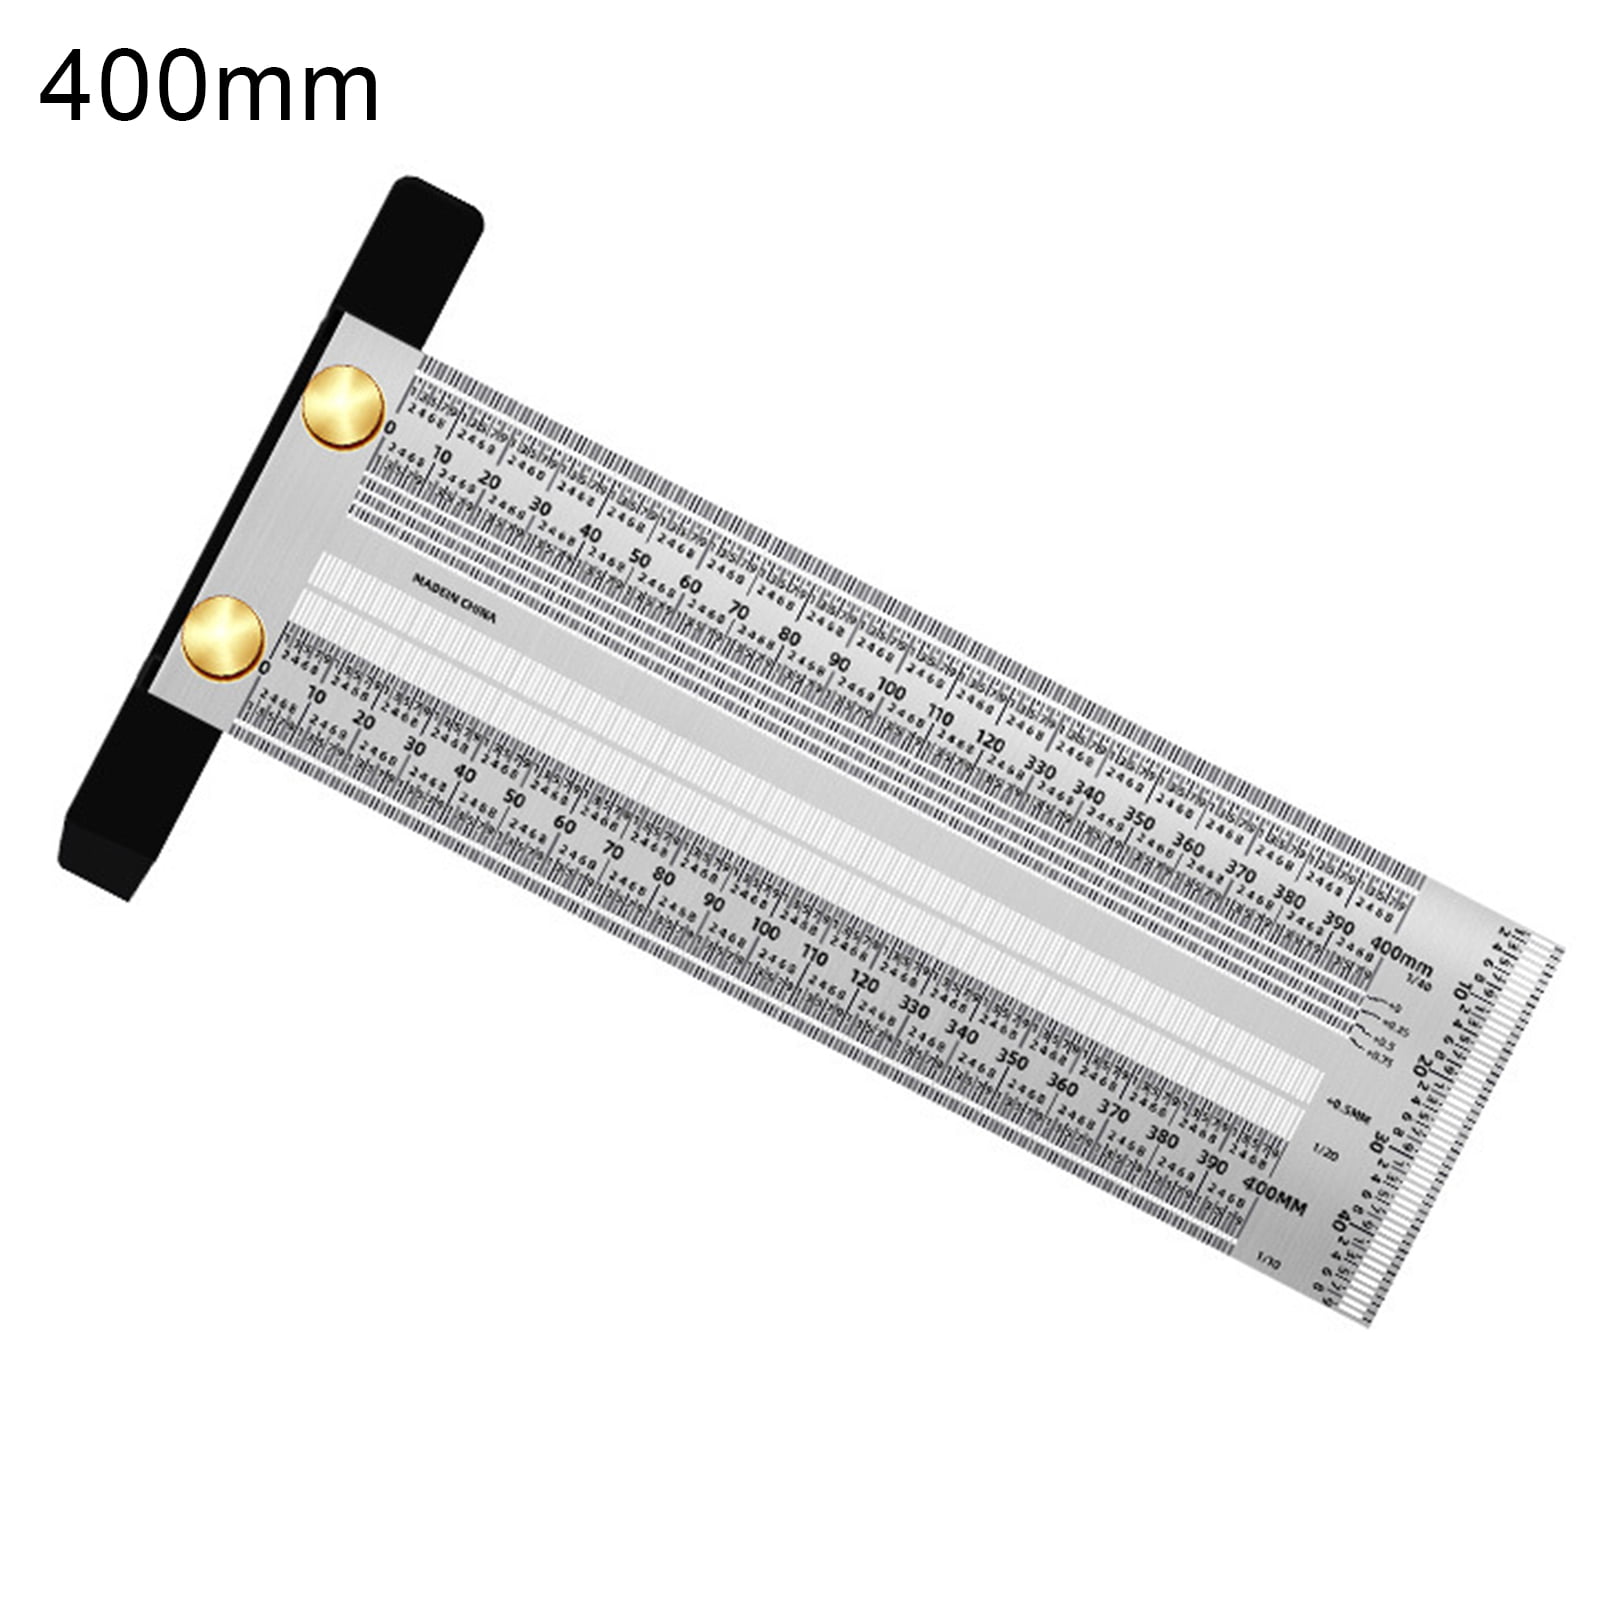 Size : E 180mm 200mm Flexible Scribing 400mm Ultra Precision Marking Ruler Right-Angle Ruler and T-Type Ruler 300mm Easy to Operate